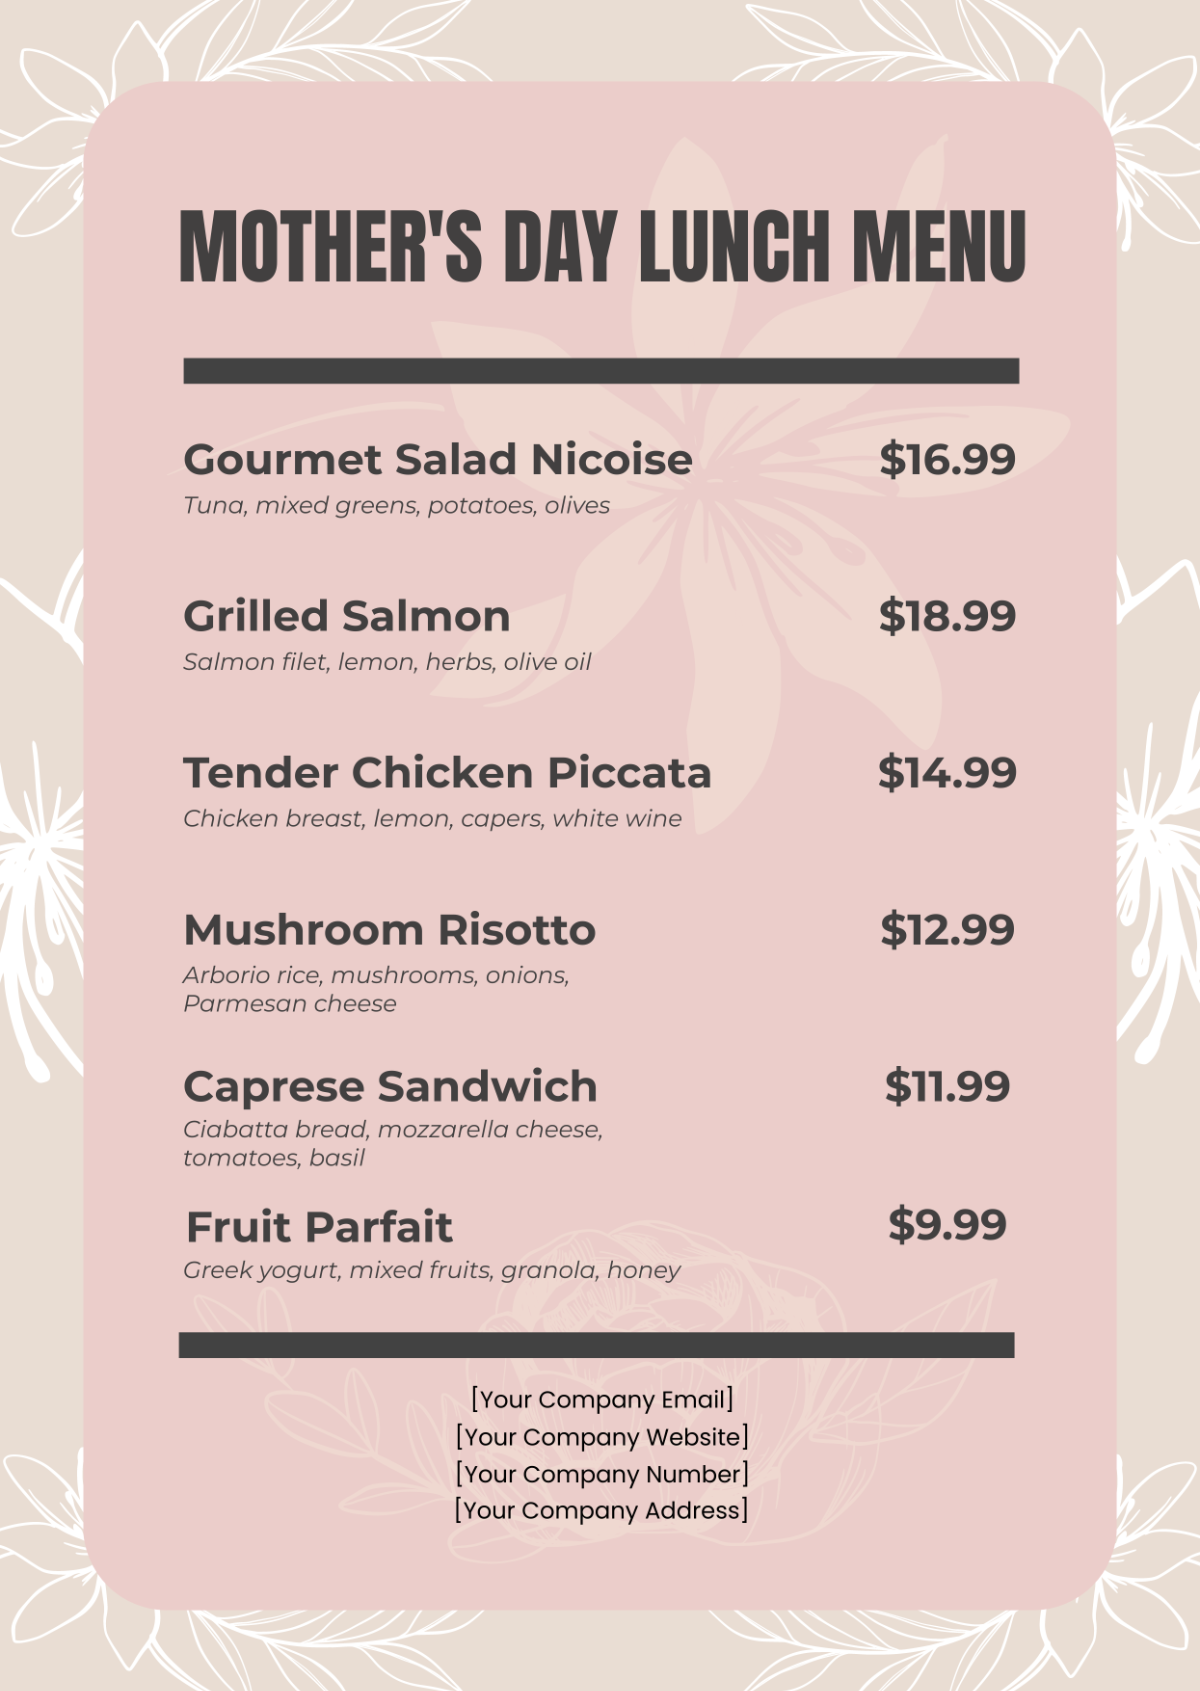 Mother's Day Lunch Menu Template